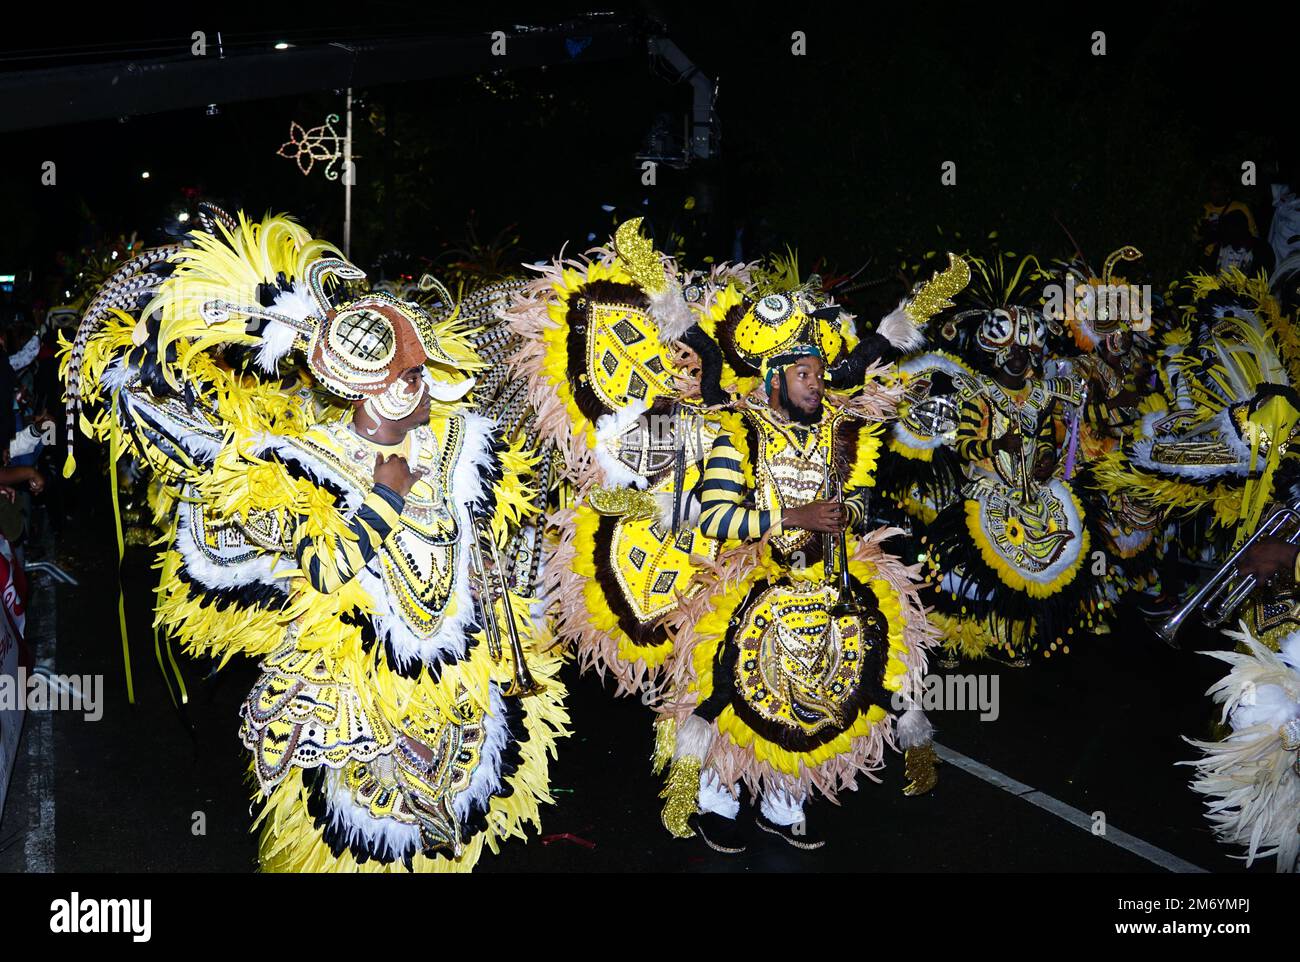 The people in traditional costumes during a Junkanoo parade in the Bahamas. Stock Photo